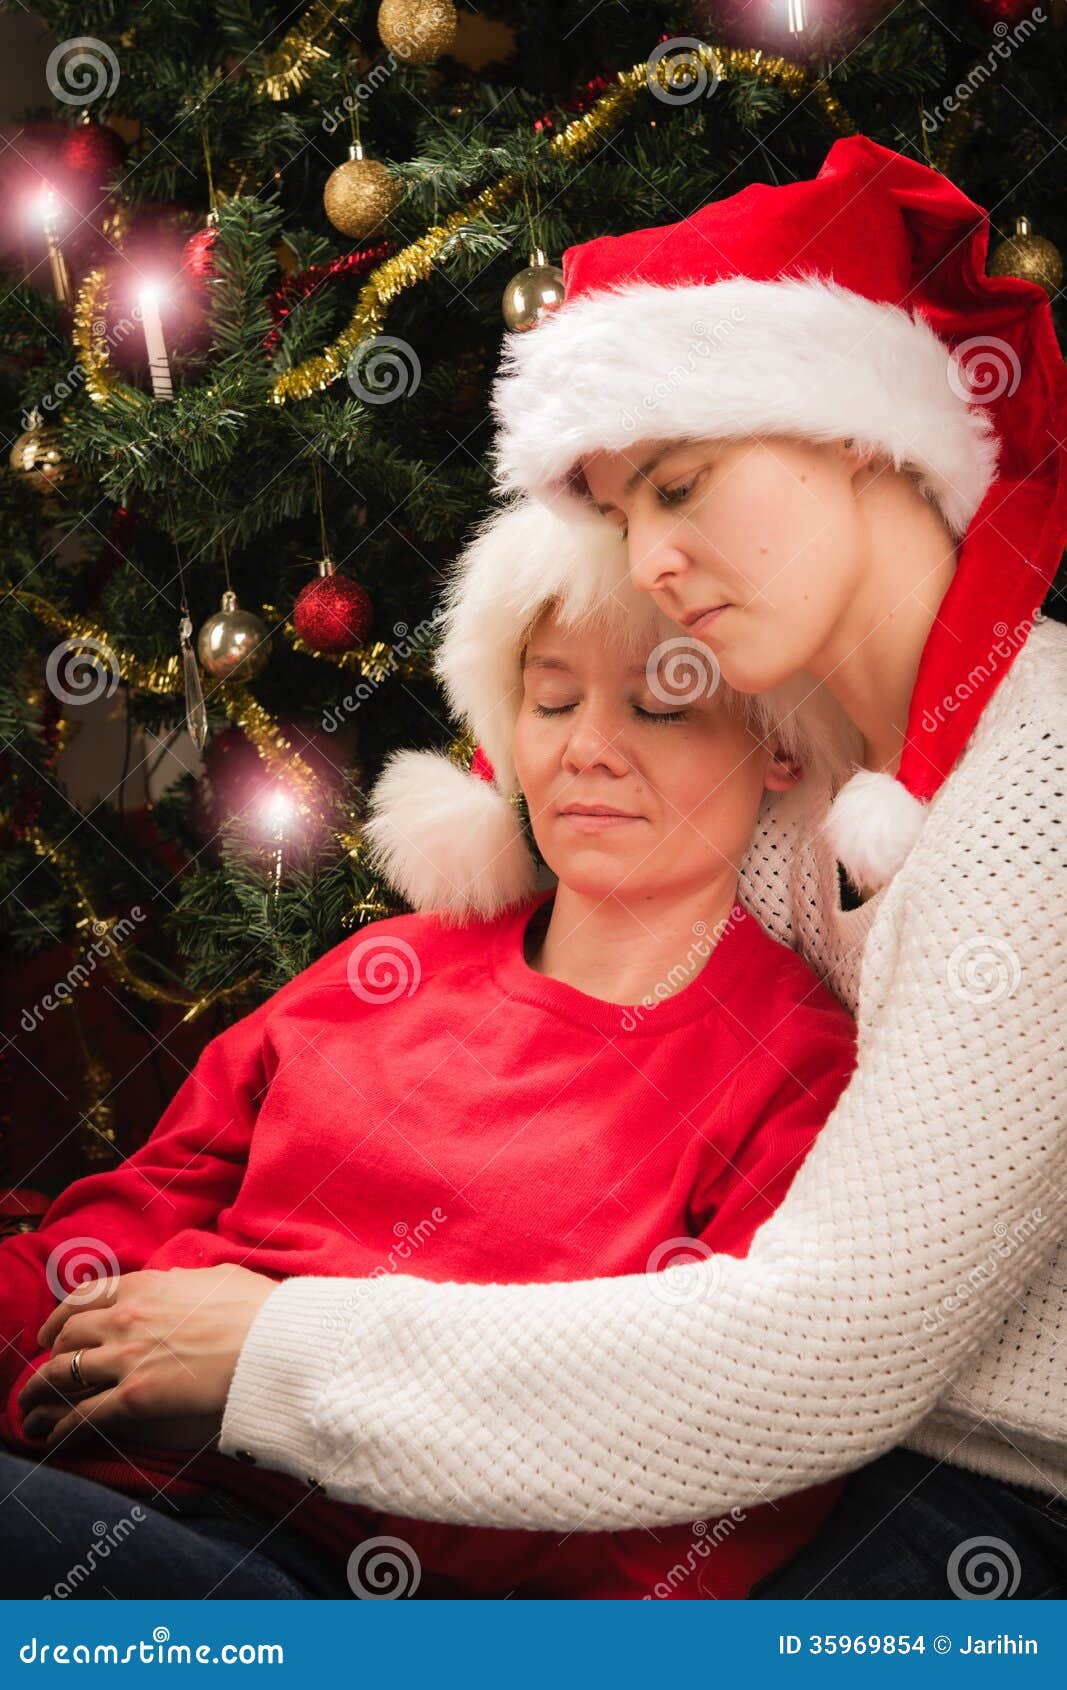 Christmas Together Stock Images - Image: 35969854